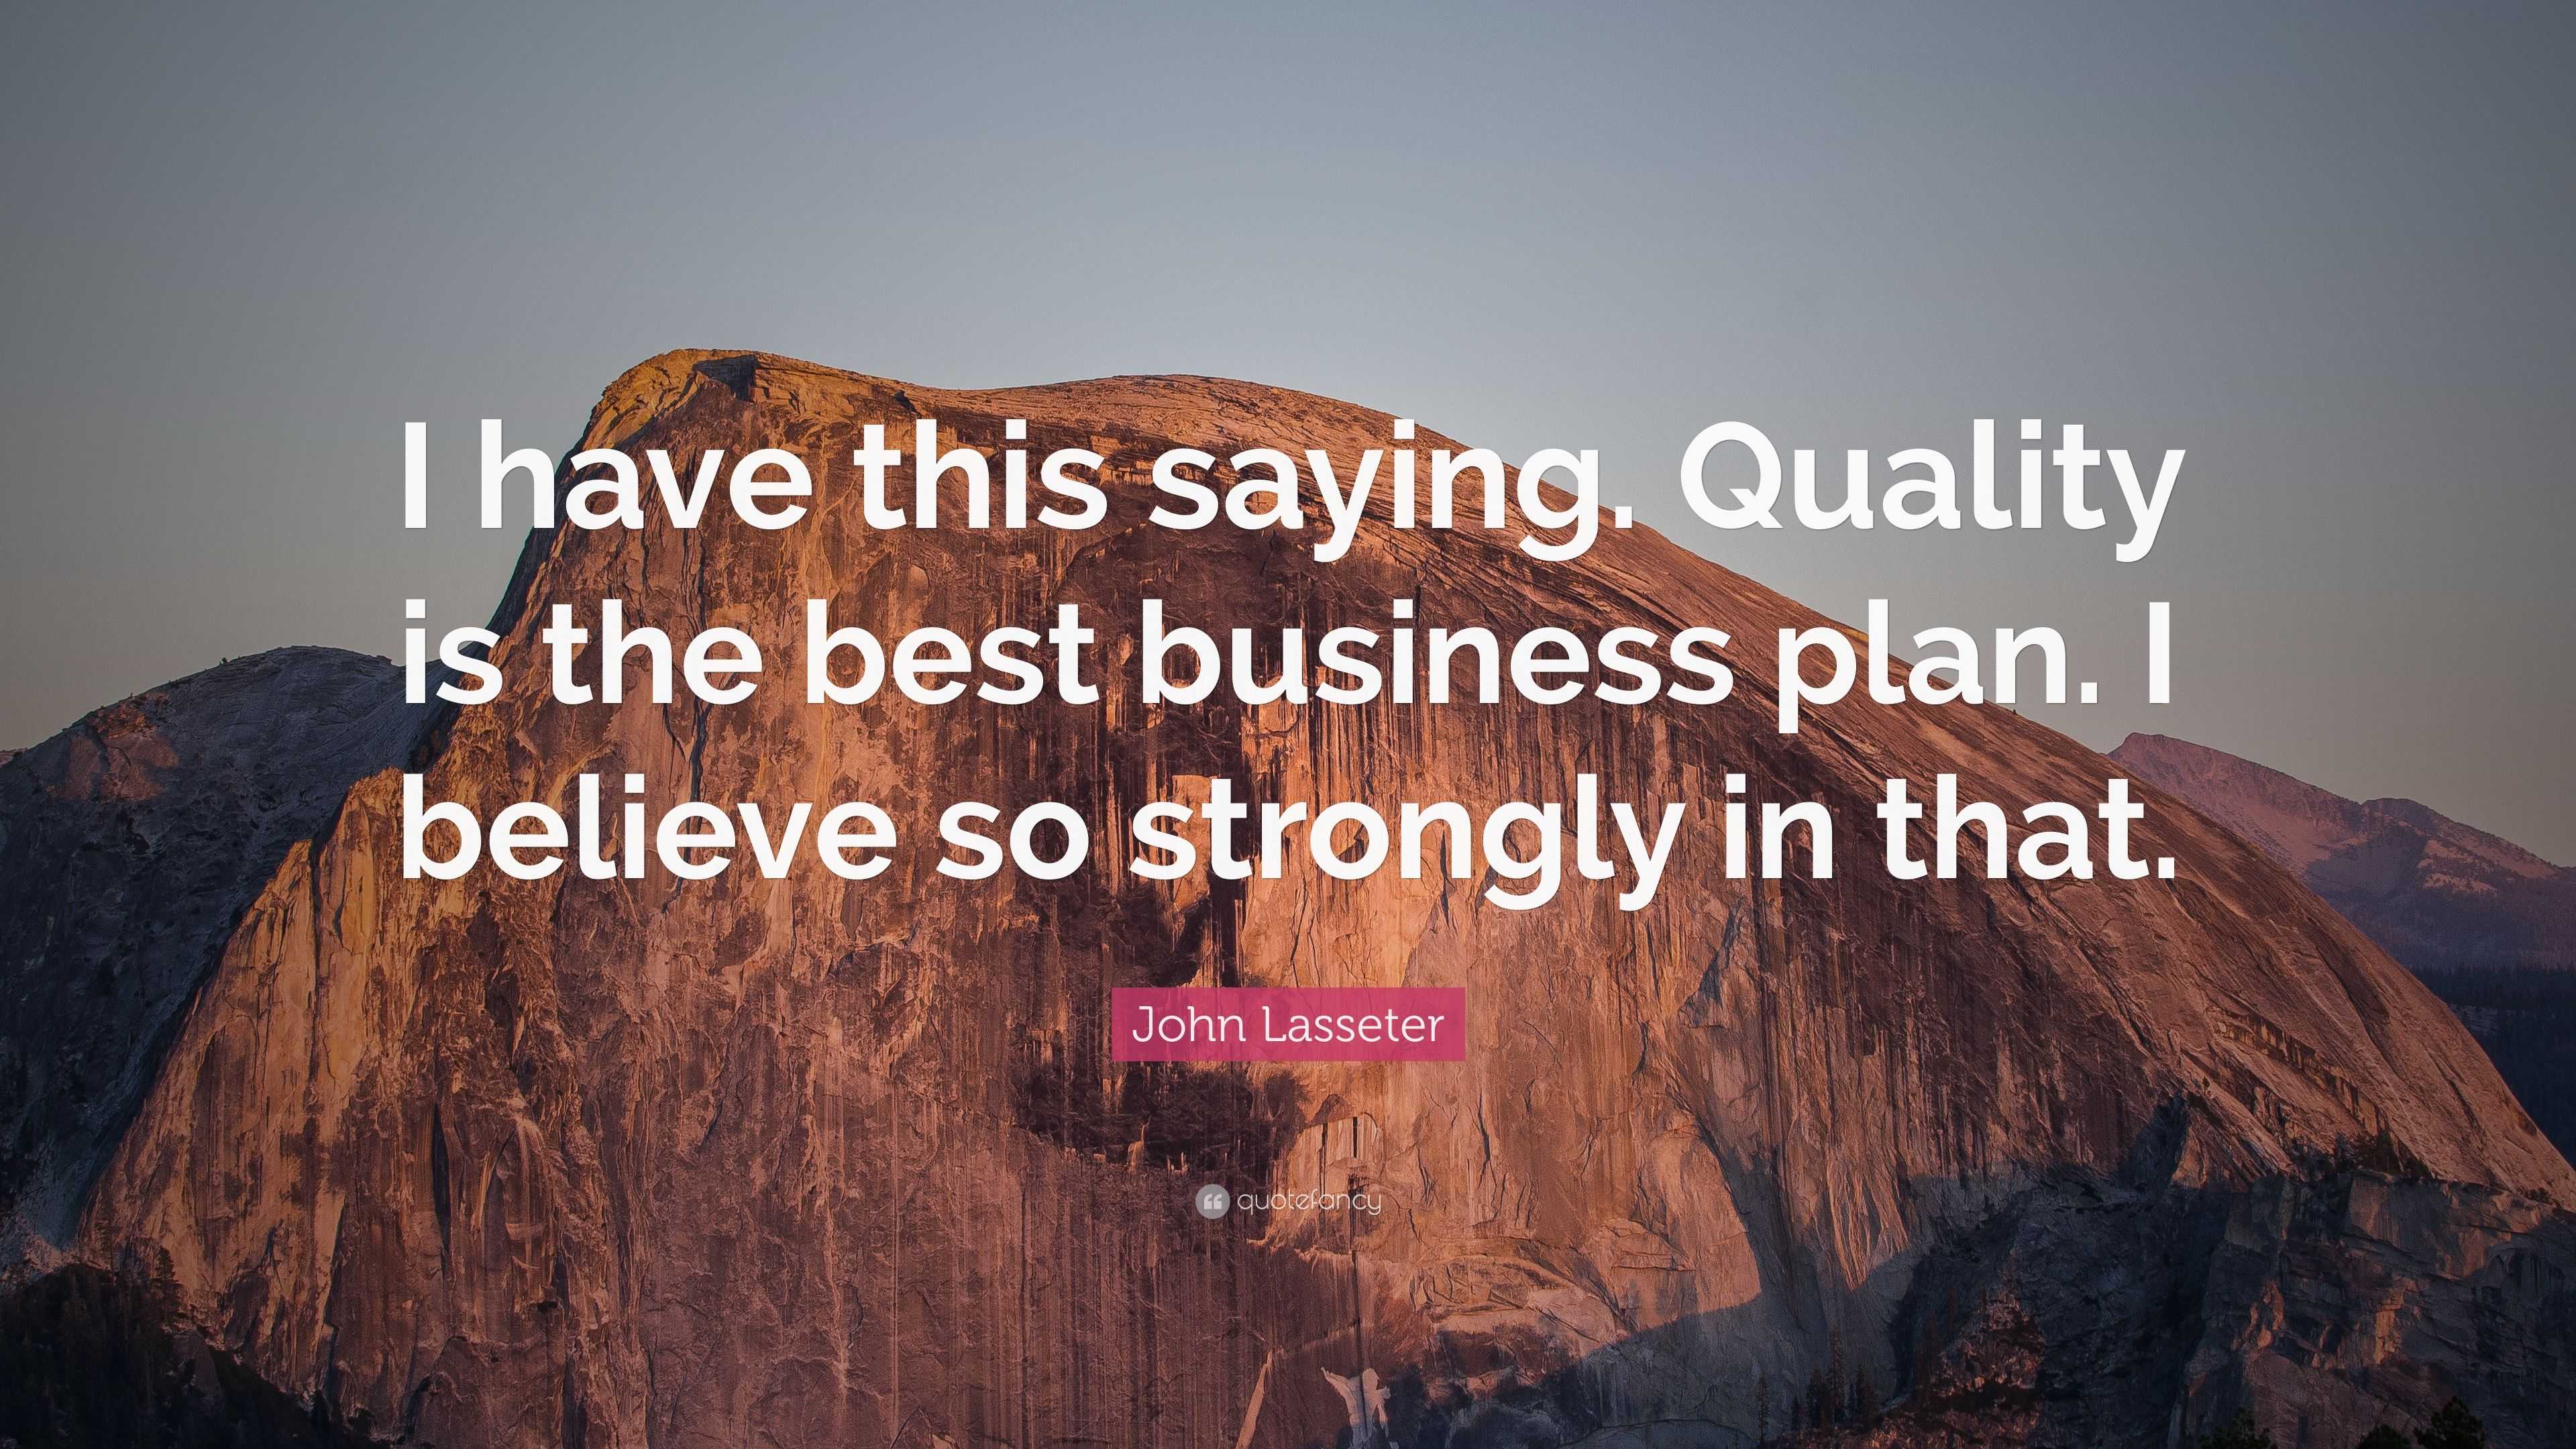 quality is the best business plan quote